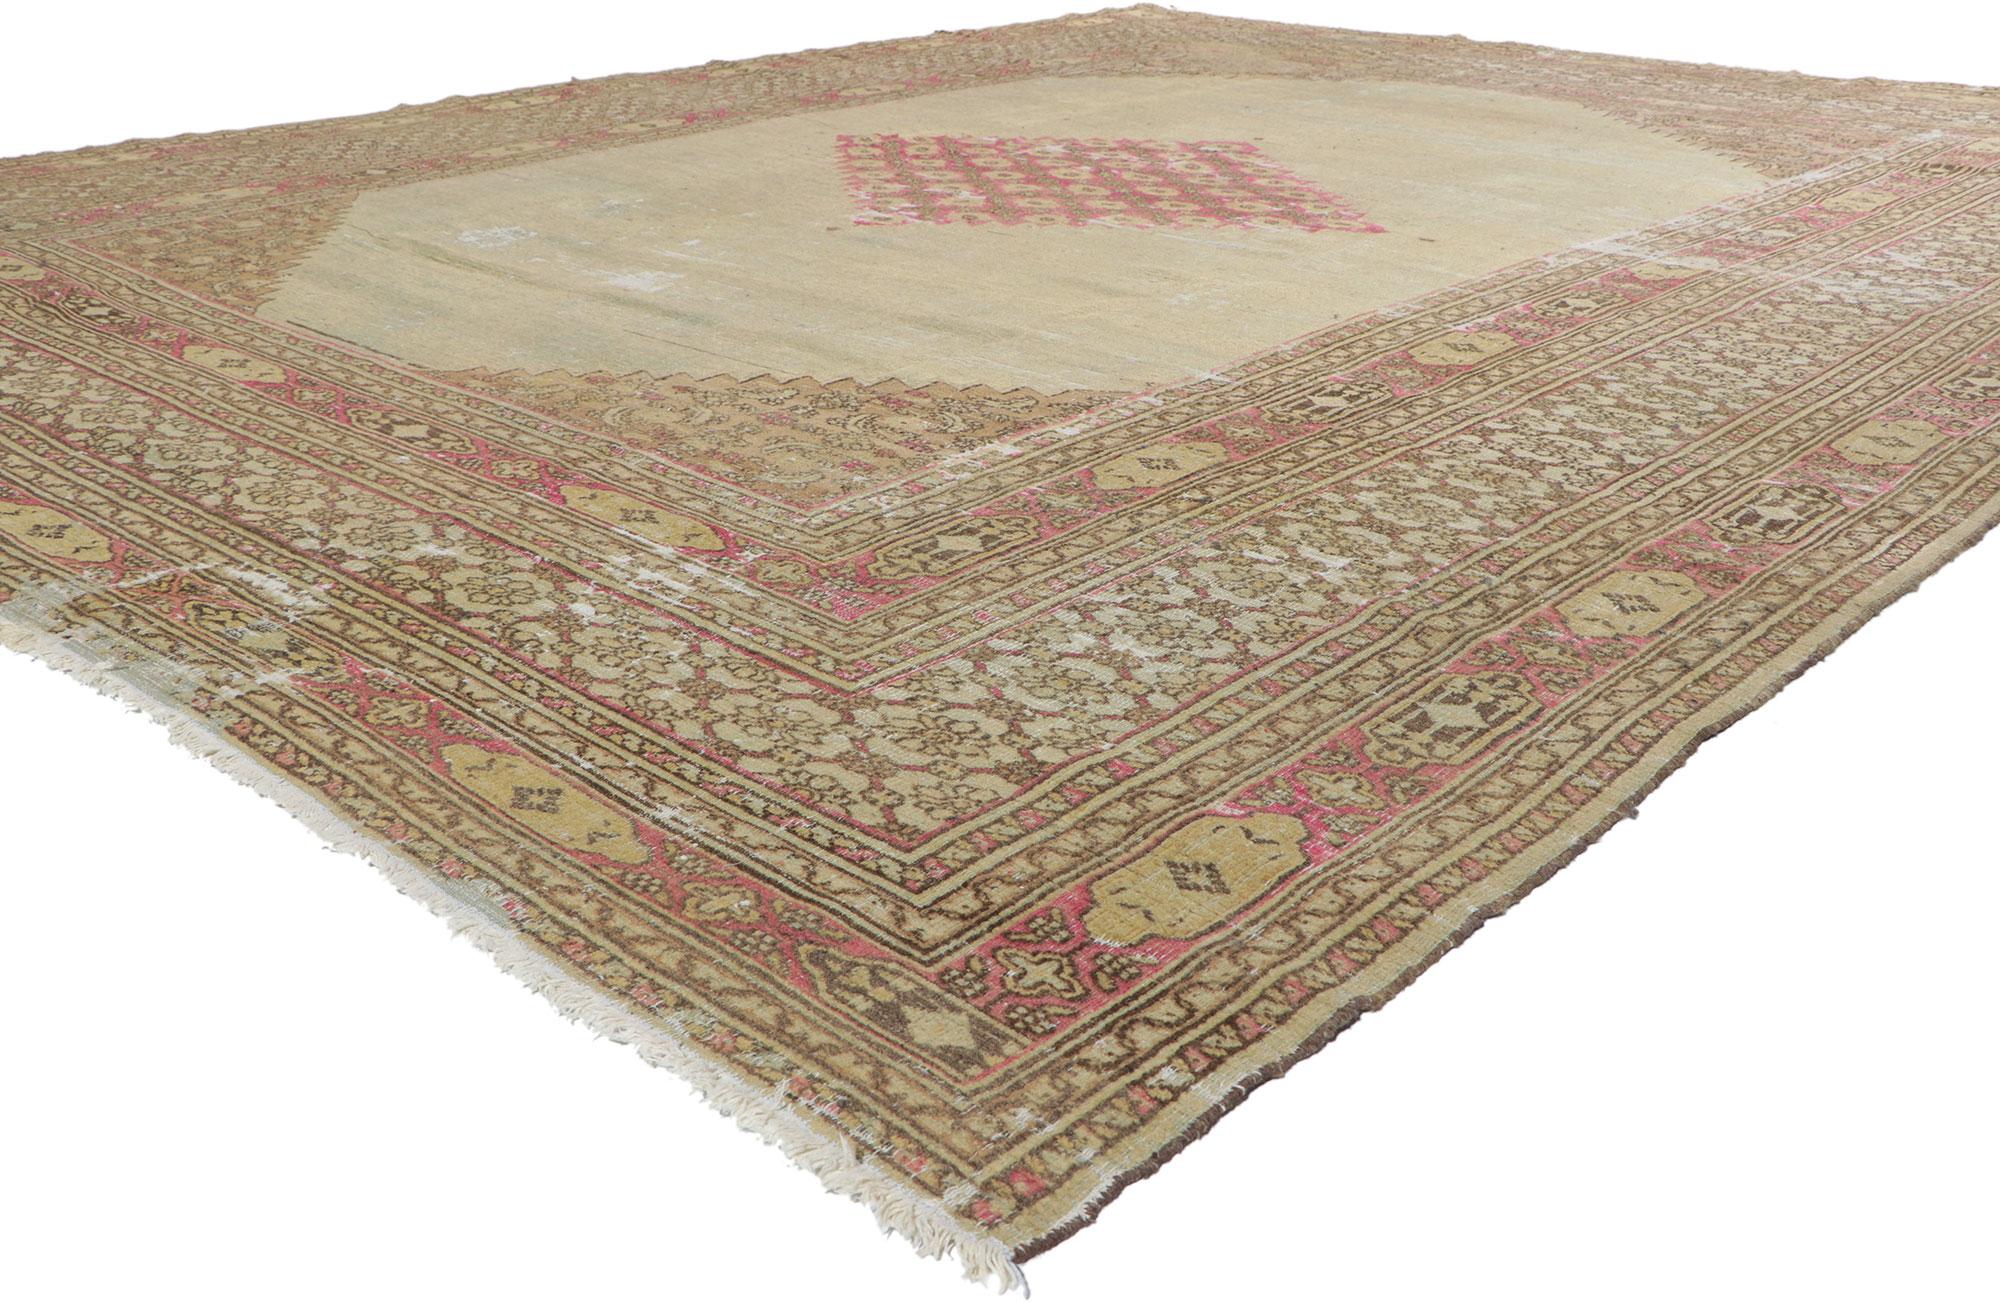 73072 Late 19th Century Distressed Antique Persian Khorassan Rug with English Manor Style 09'10 x 12'07. With its soft, subtle hues and cozy simplicity, this hand knotted wool distressed antique Persian Khorassan rug charms with ease and beautifully